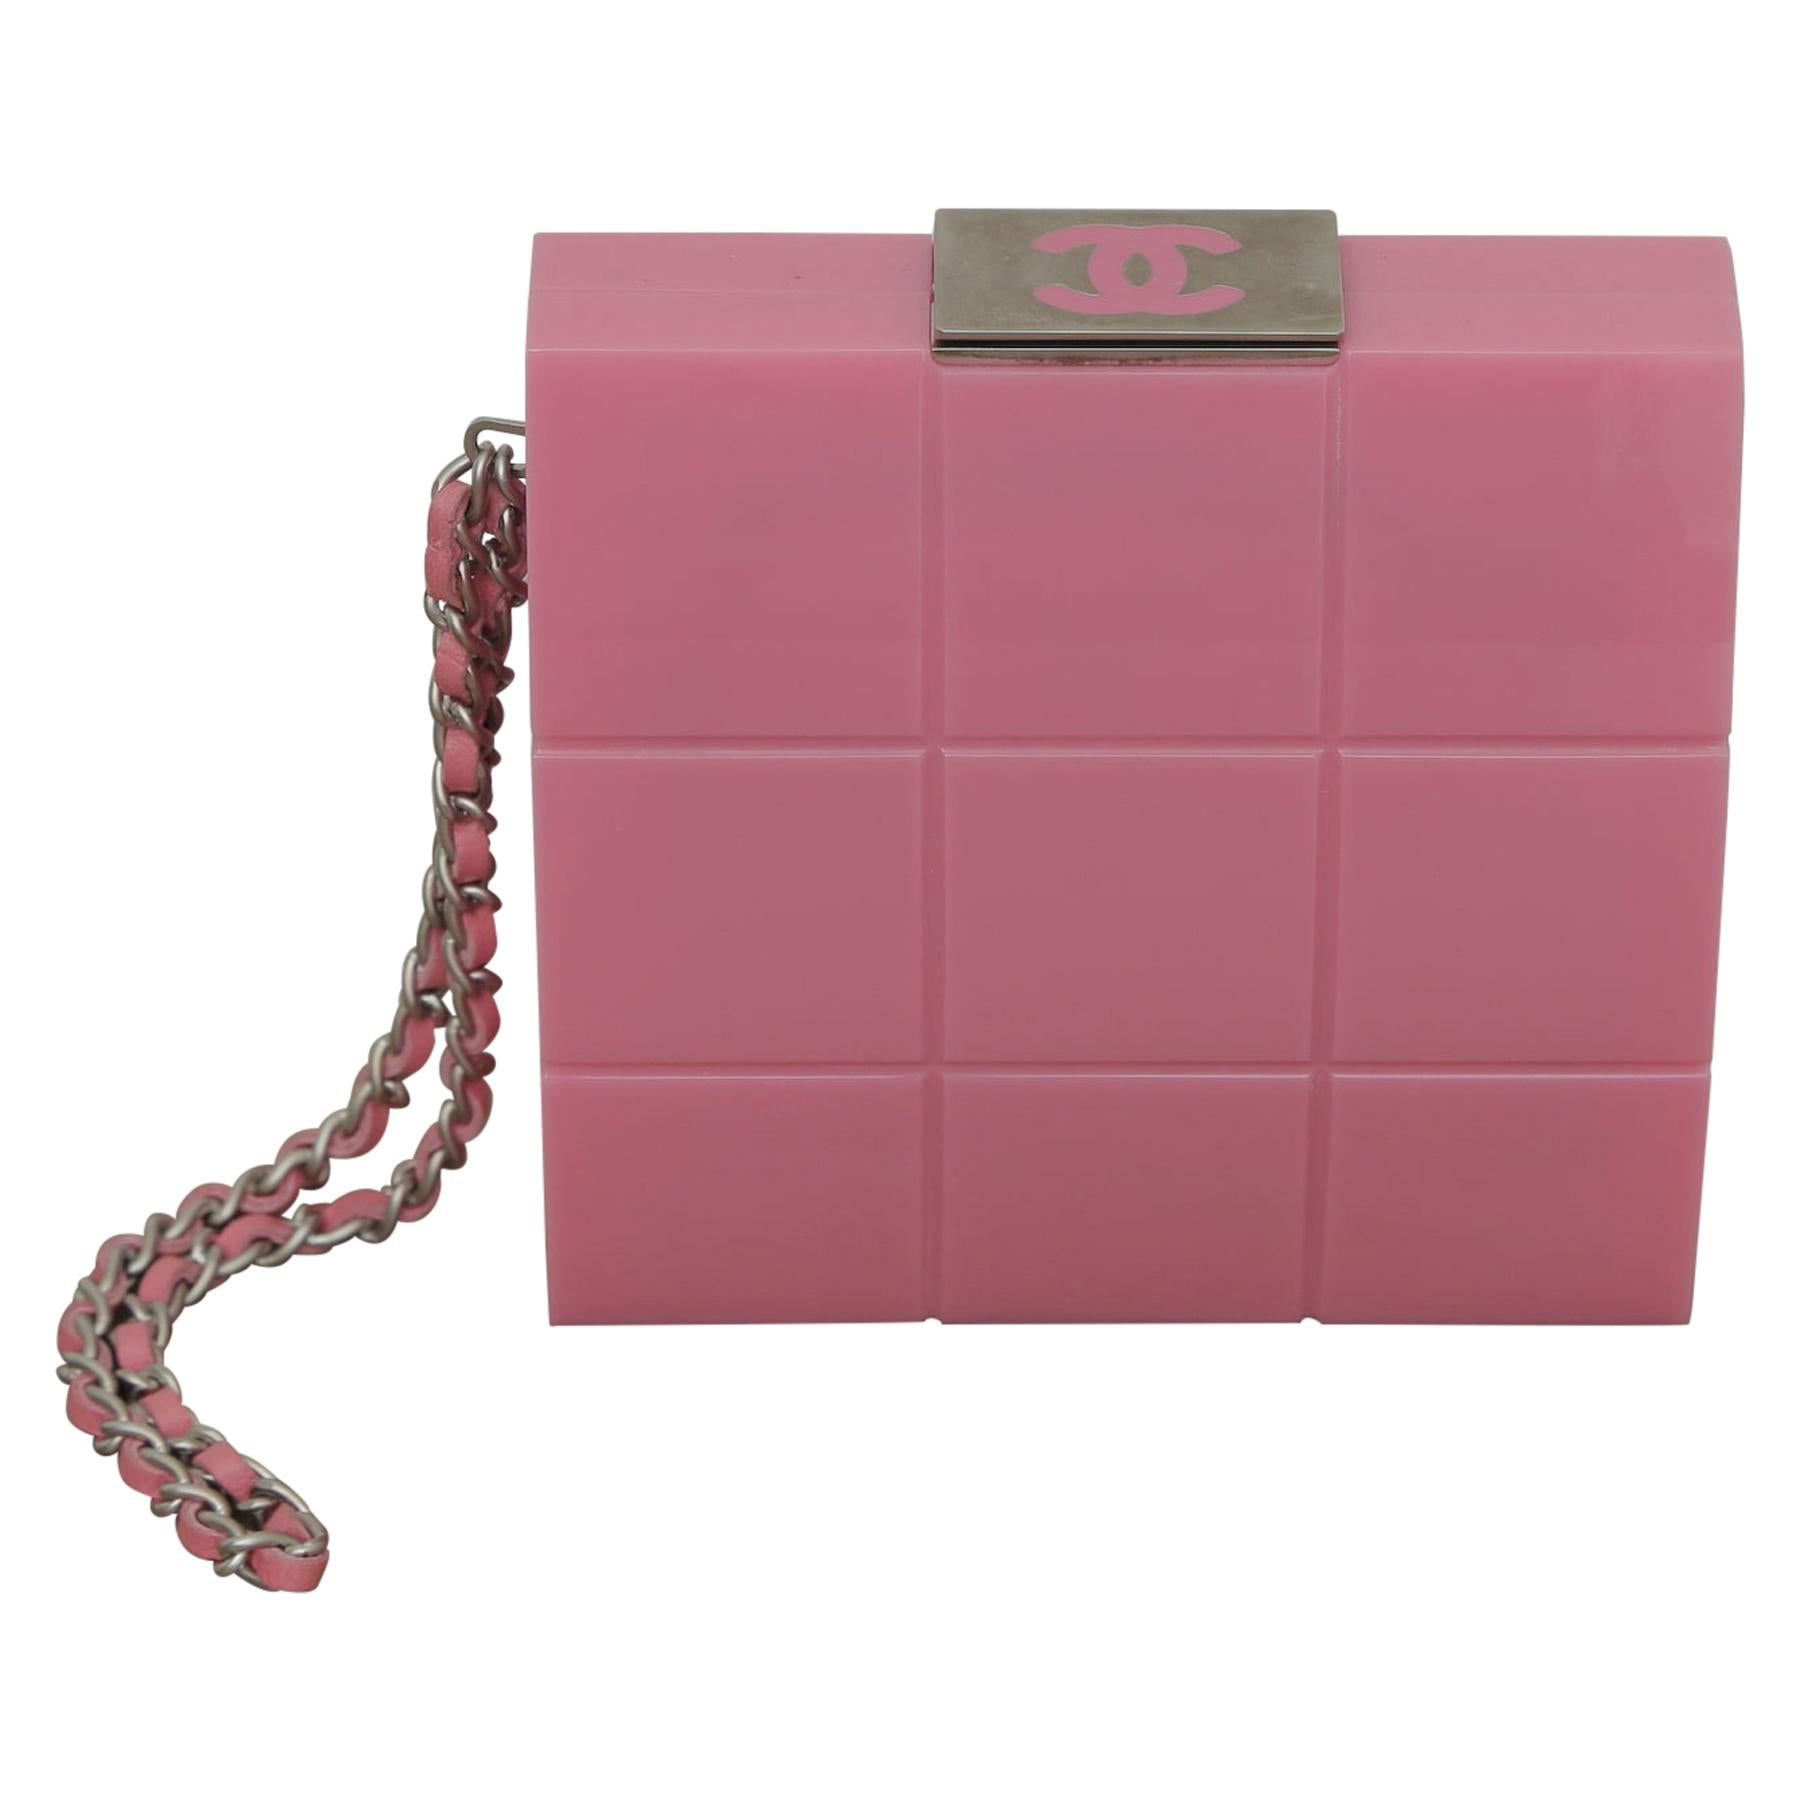  2002s Rare Chanel Perspex Lucite Minaudiere Pink Plastic Clutch For Sale